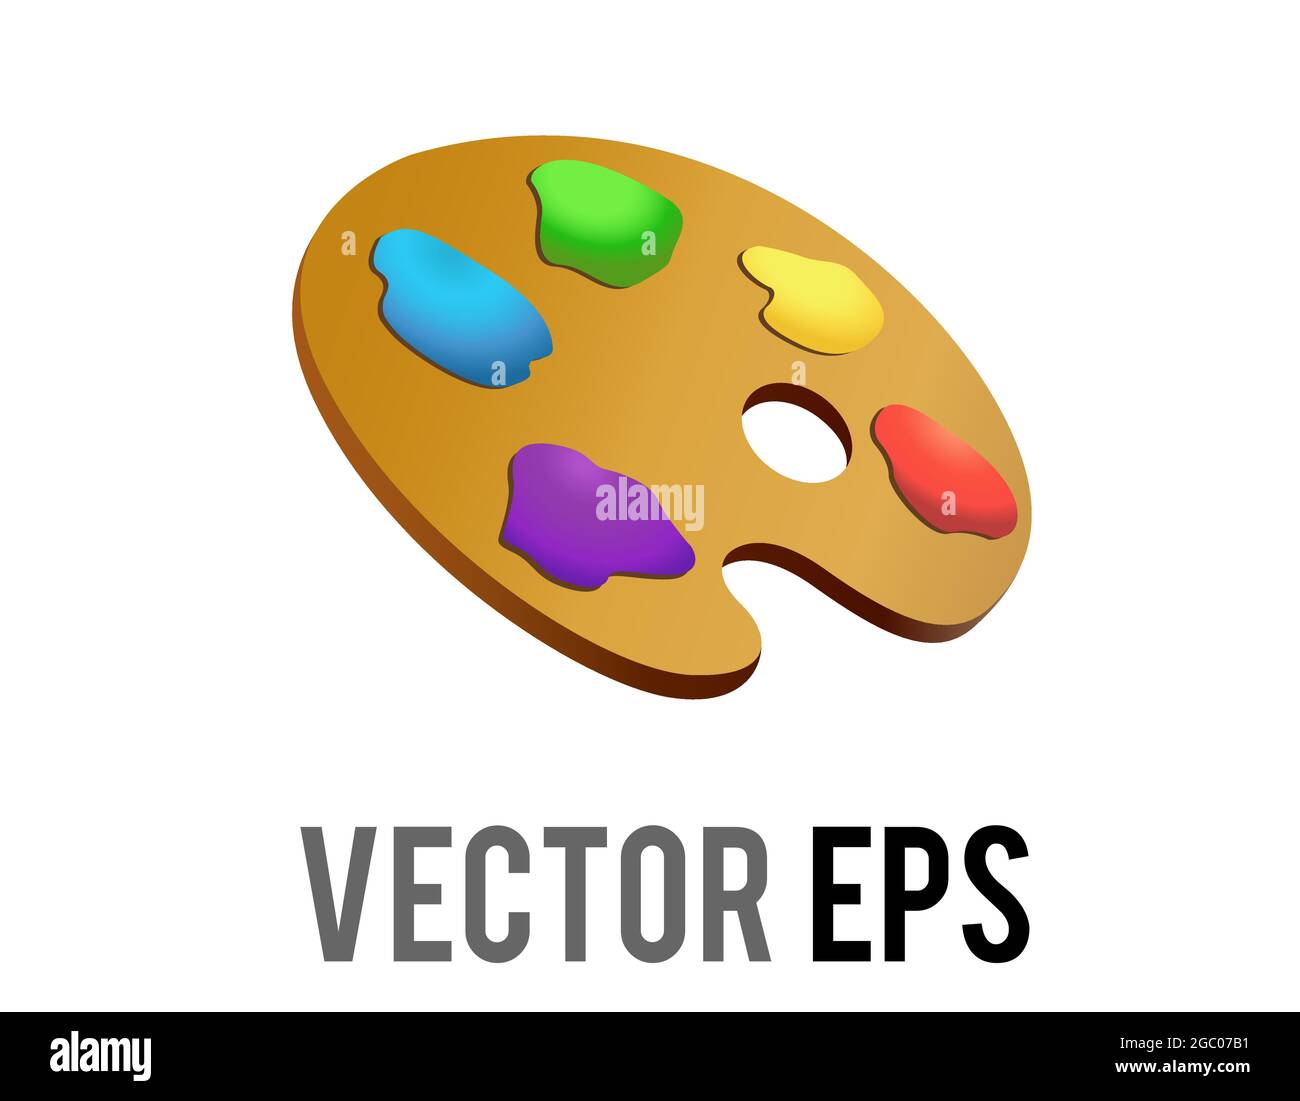 The isolated vector artist palette icon used when painting, to store and mix paint colors Stock Vector